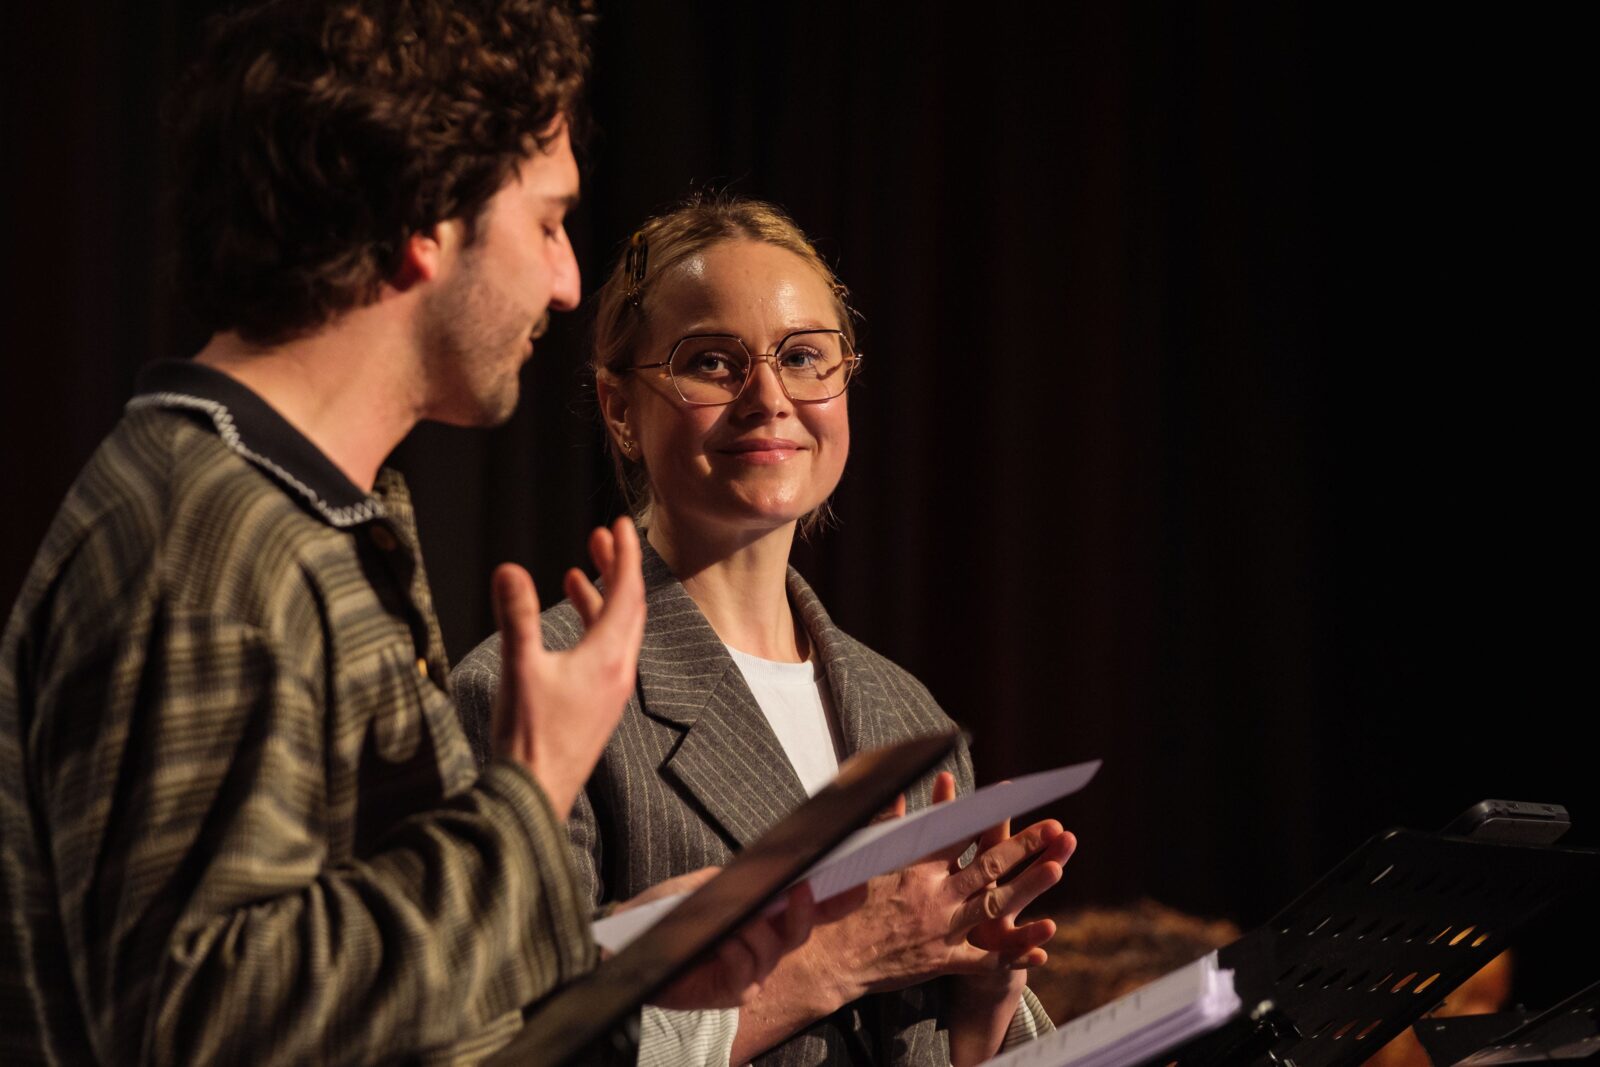 Eryn-Jean Norvill and Danny Ball performing in Play In A Day